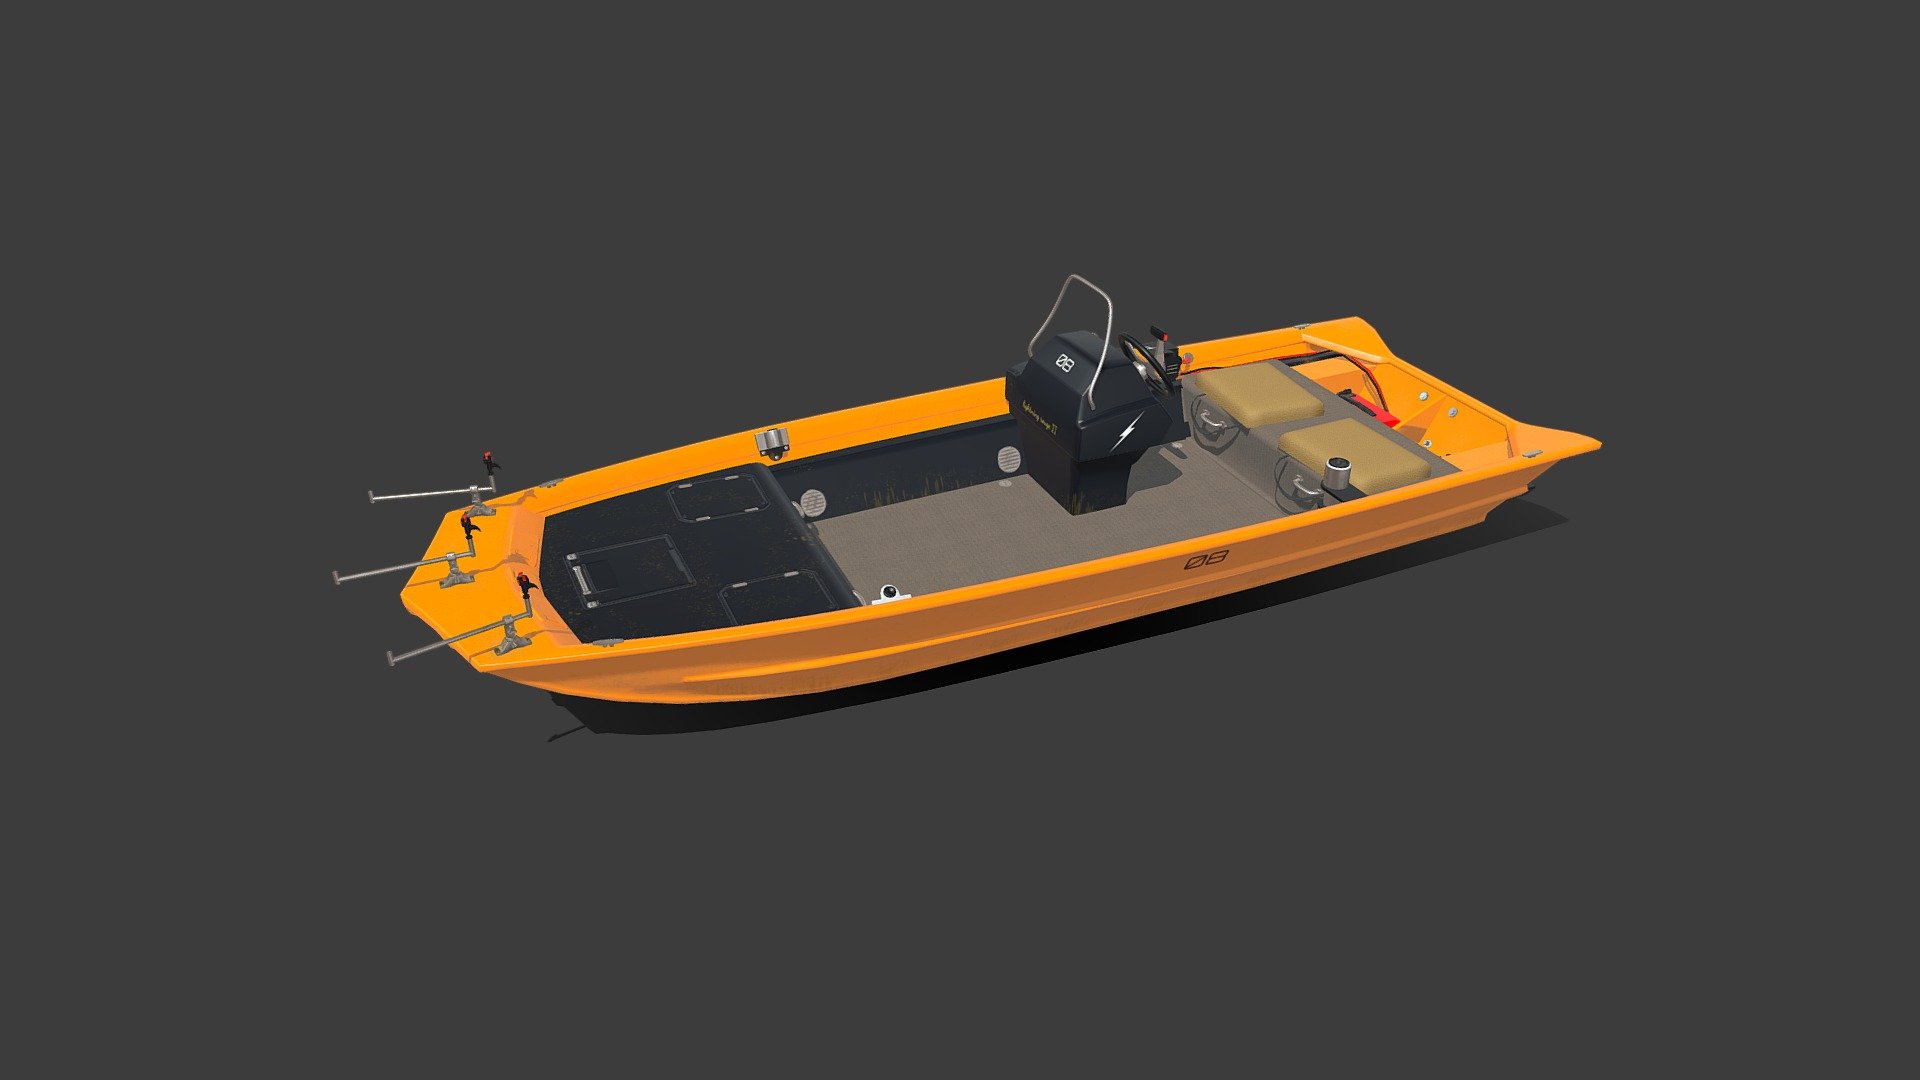 Carp Fishing Boat

textures are in PNG format 4096x4096 PBR metalness 1 set - Carp Fishing Boat - Buy Royalty Free 3D model by MaX3Dd 3d model